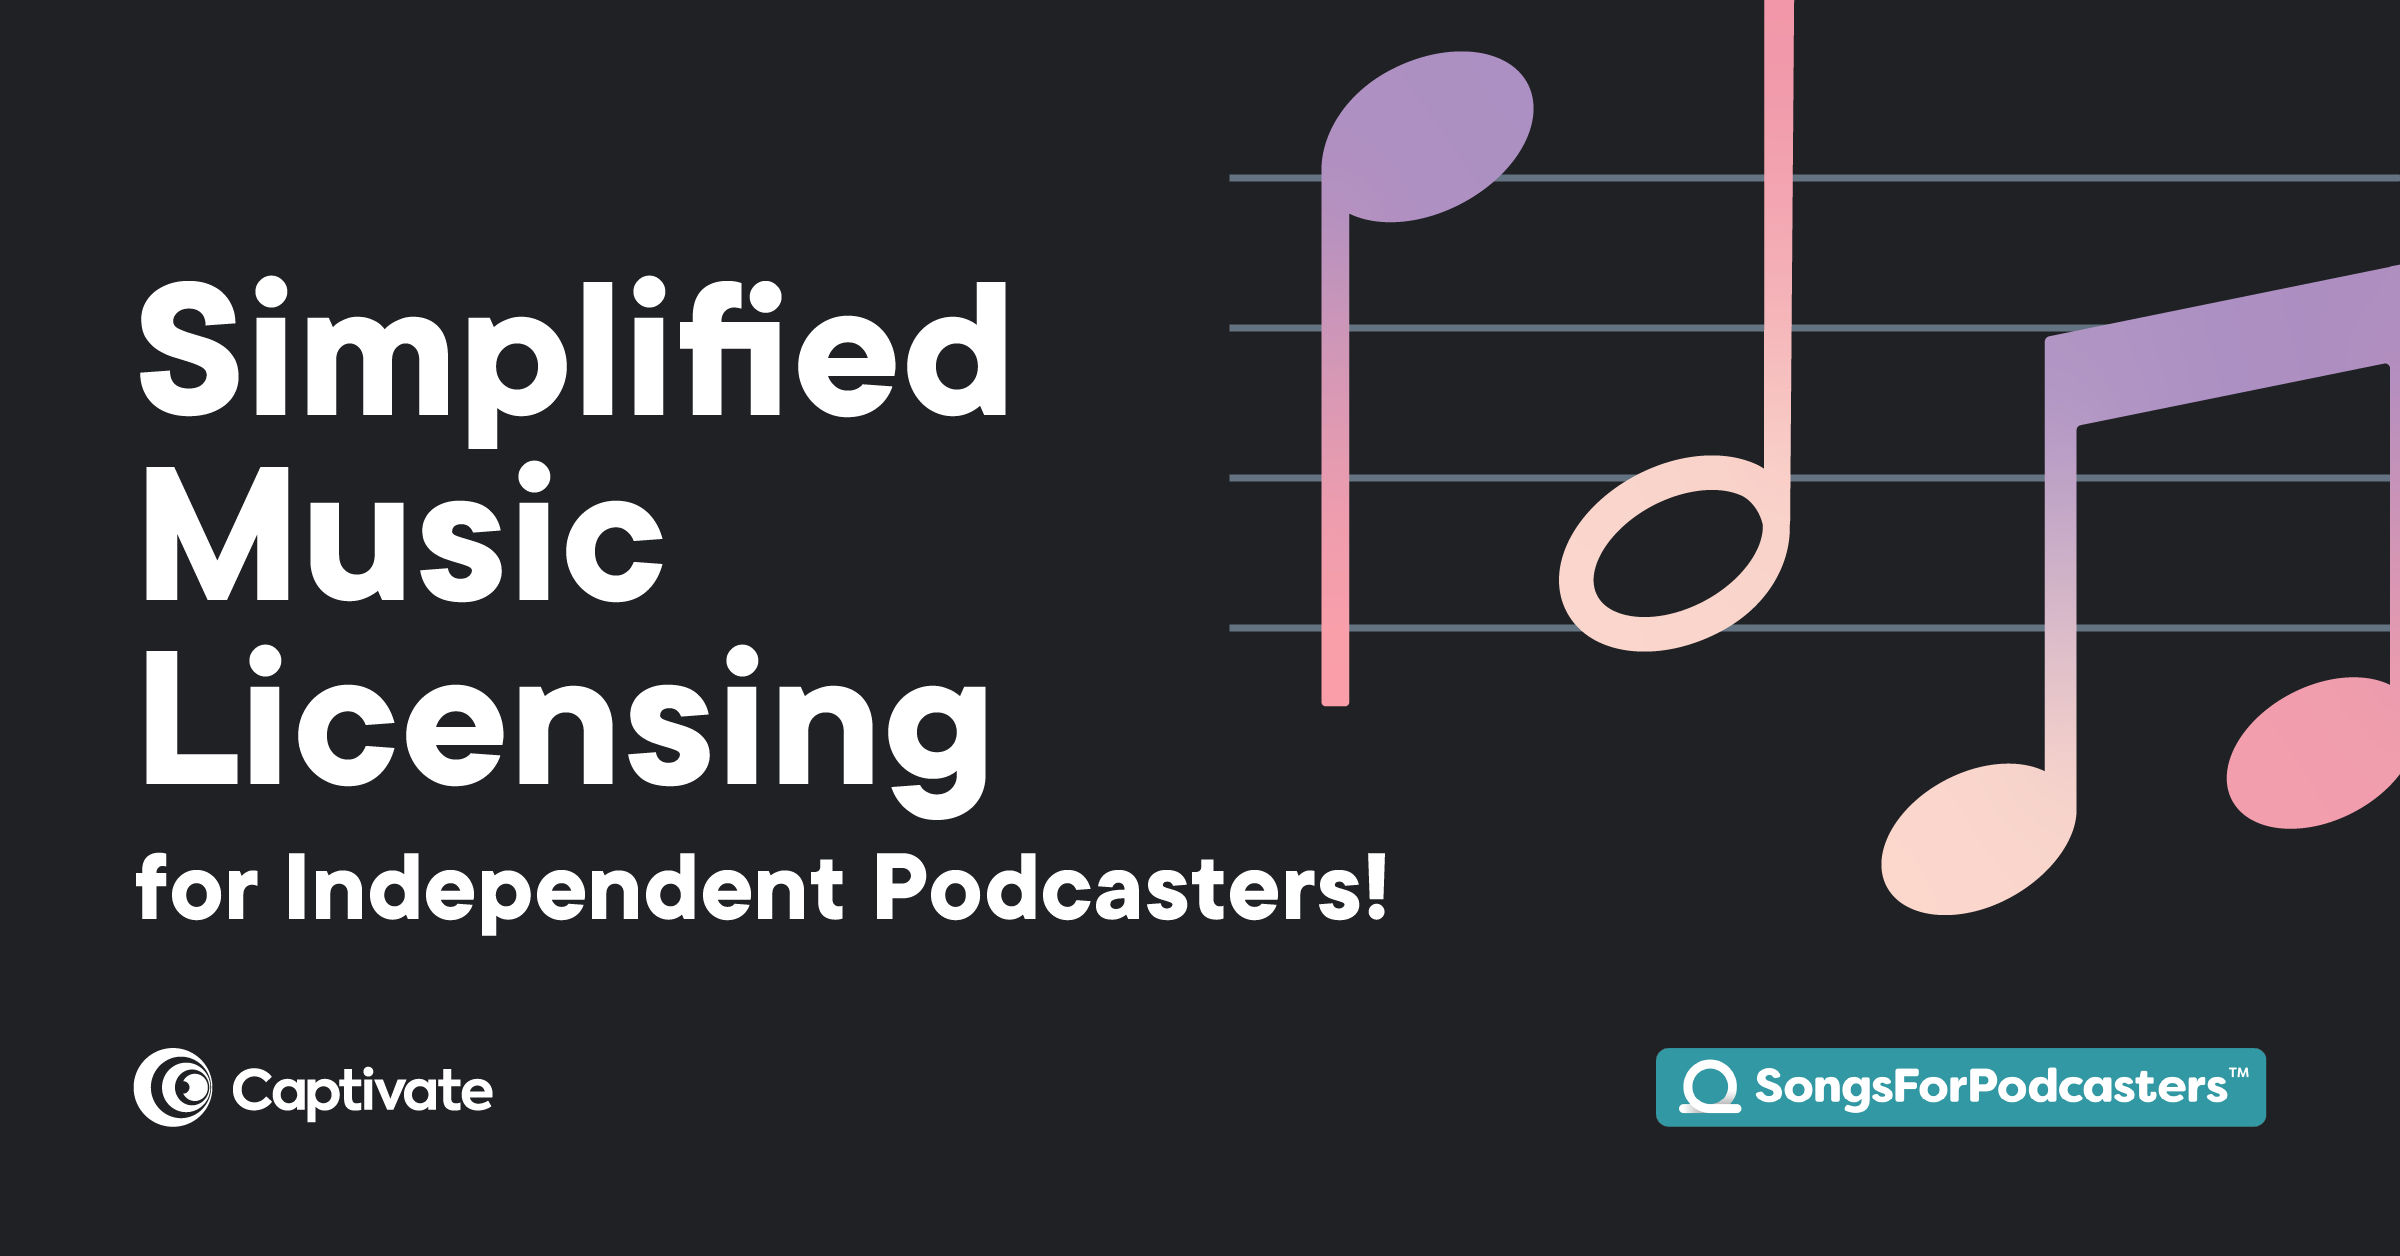 Featured Image Simplified Music Licensing for Independent Podcasters